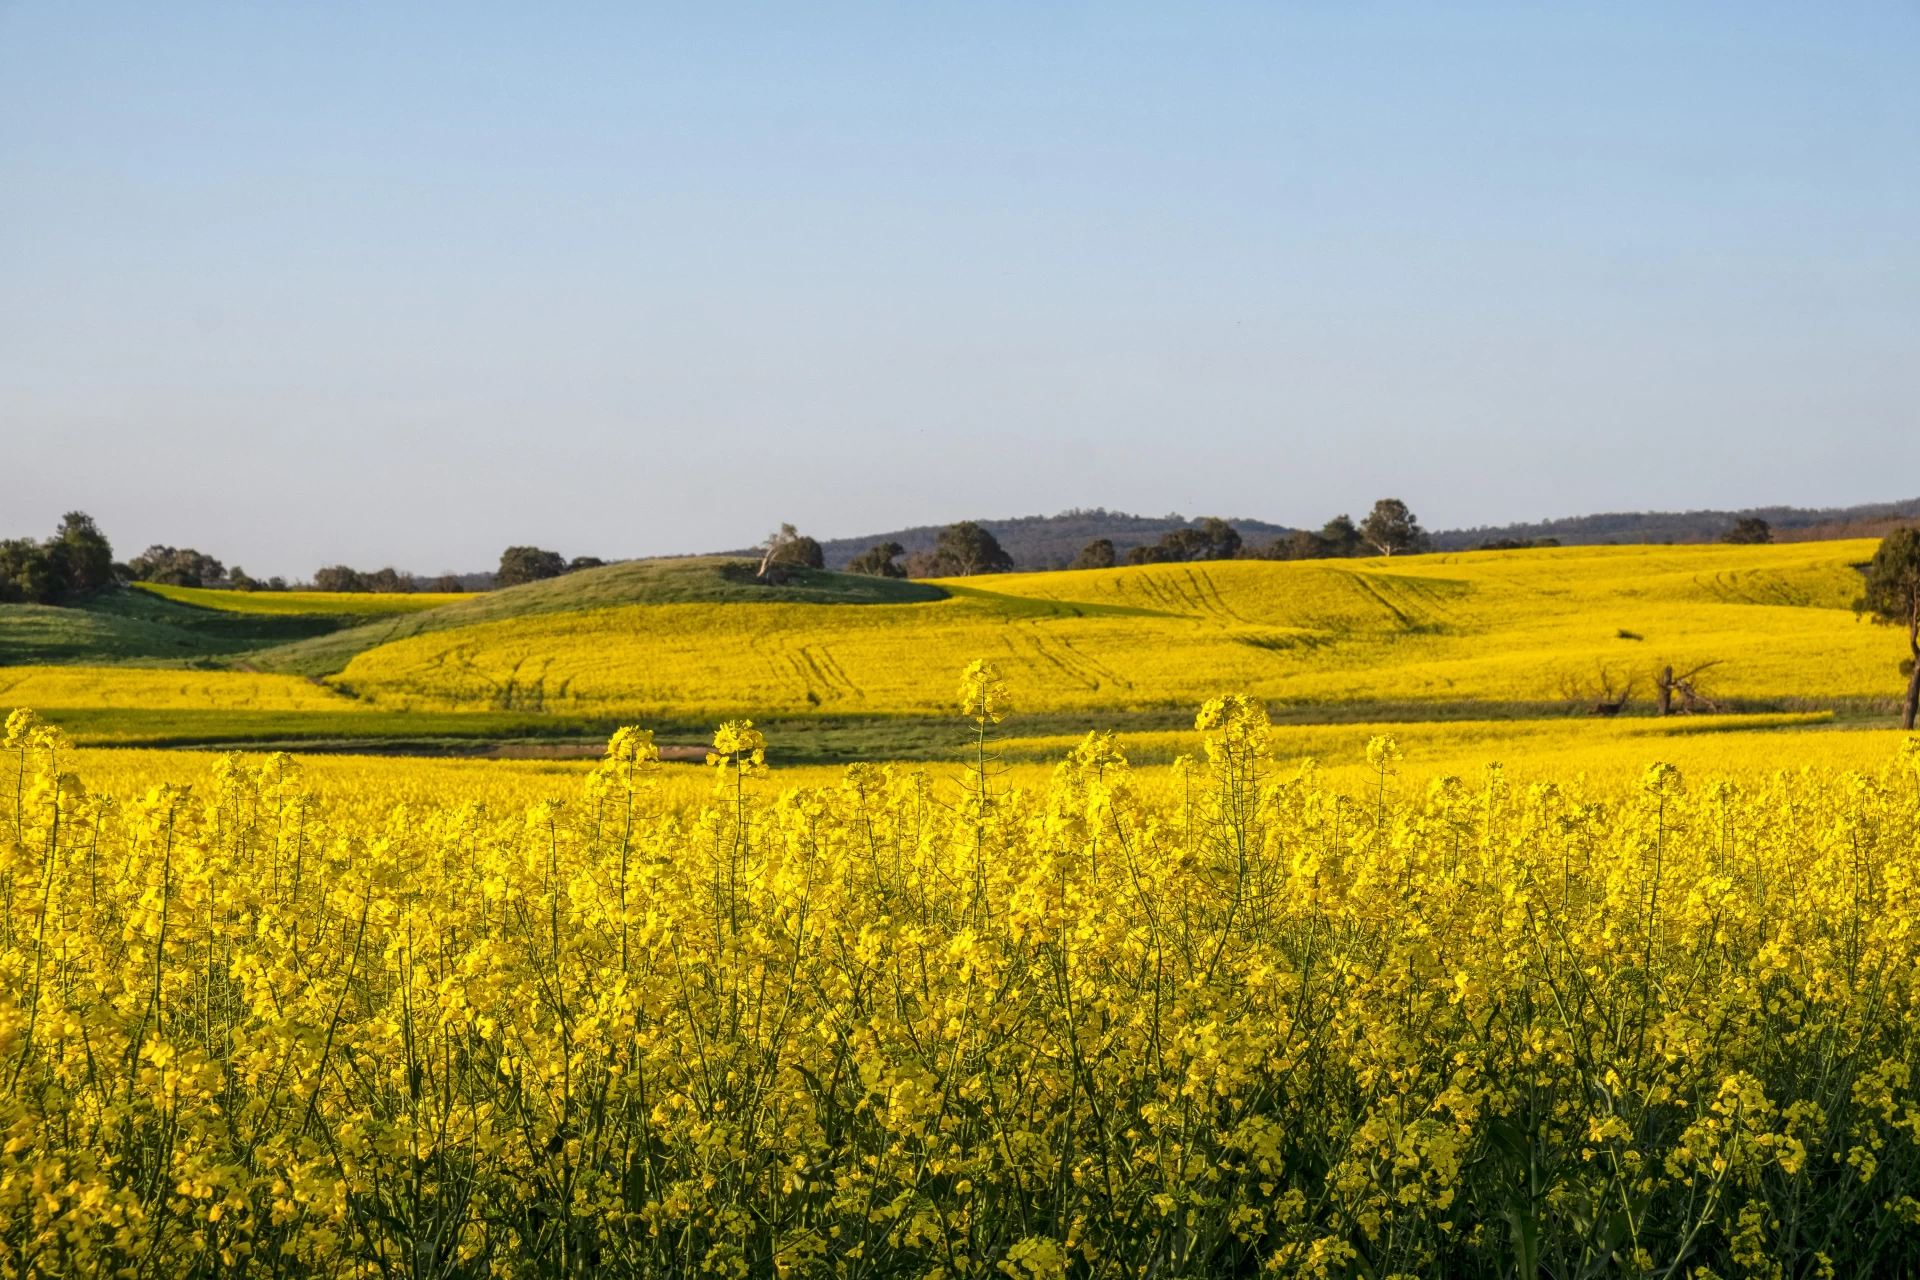 A field of yellow flowers with hills in the background.